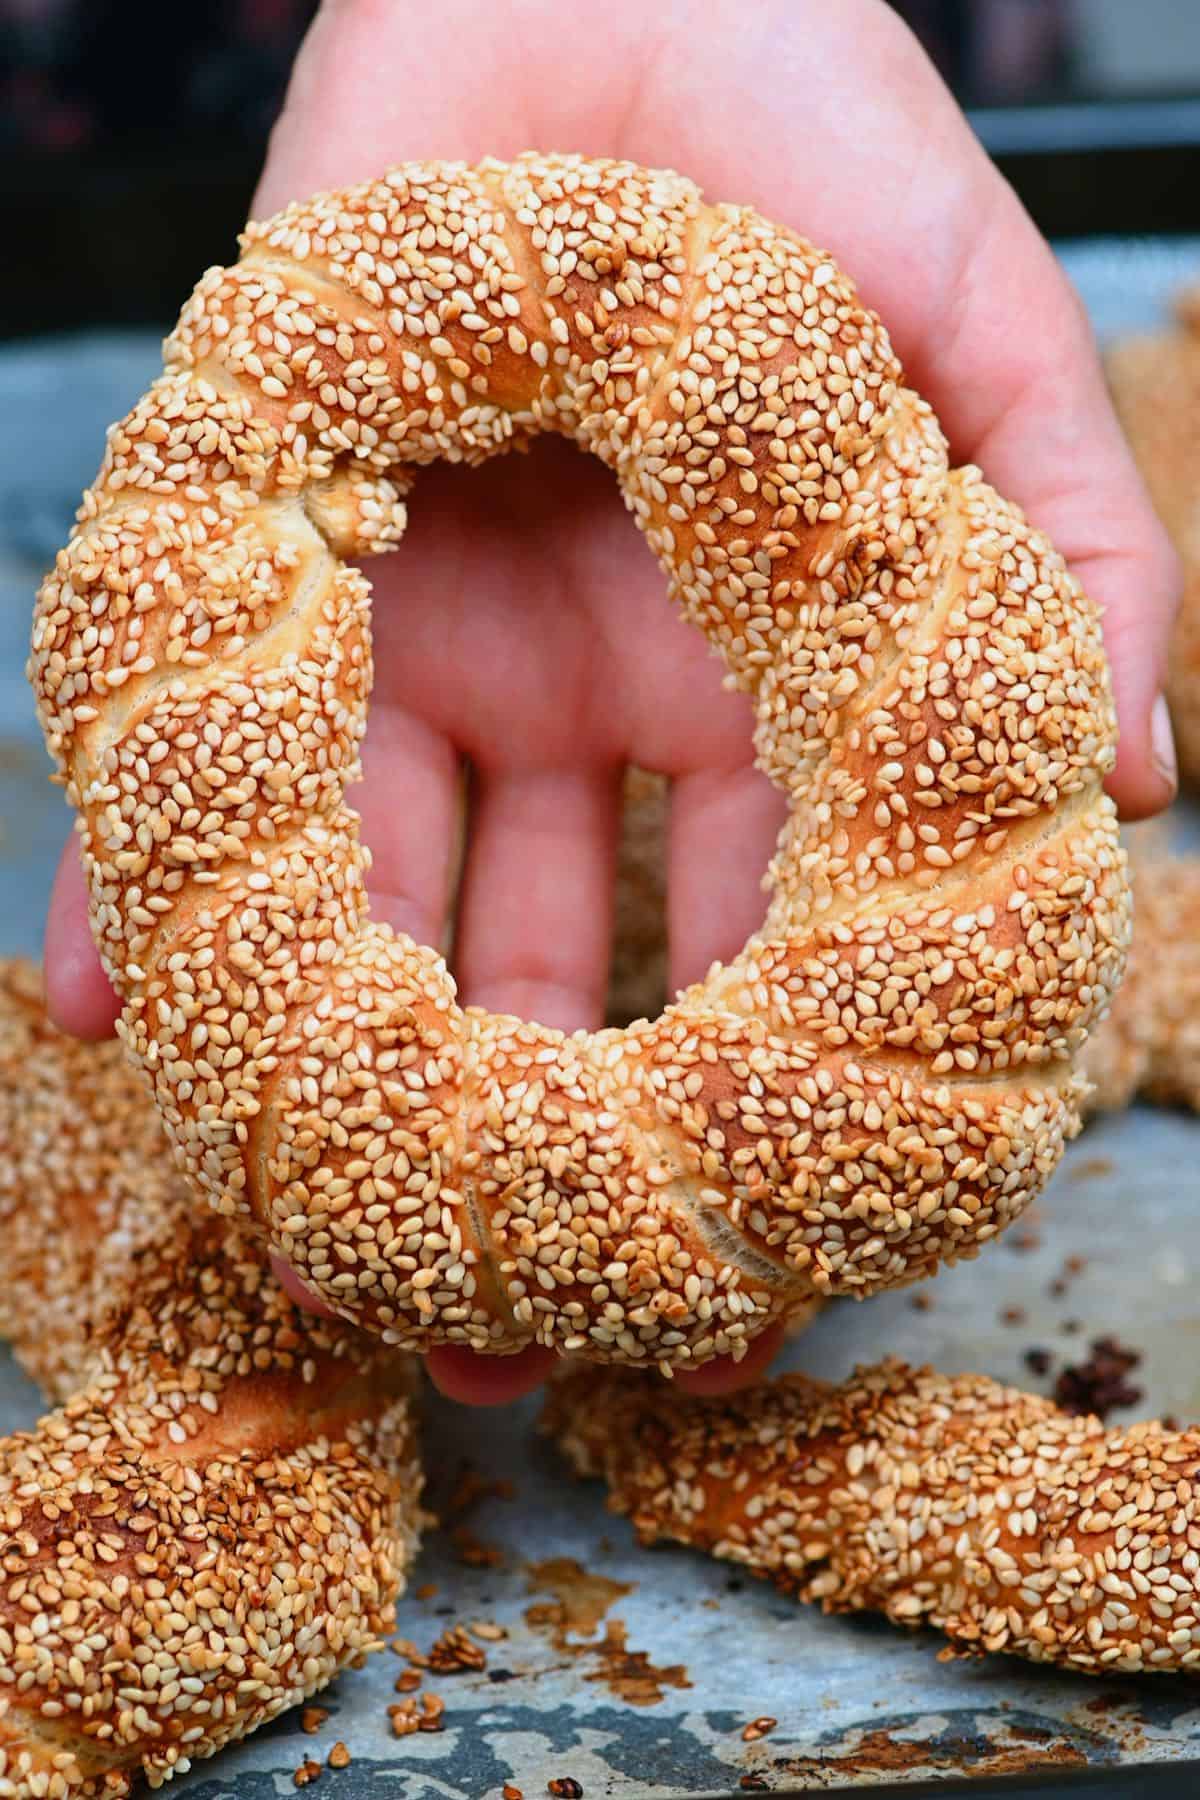 A hand holding a baked simit